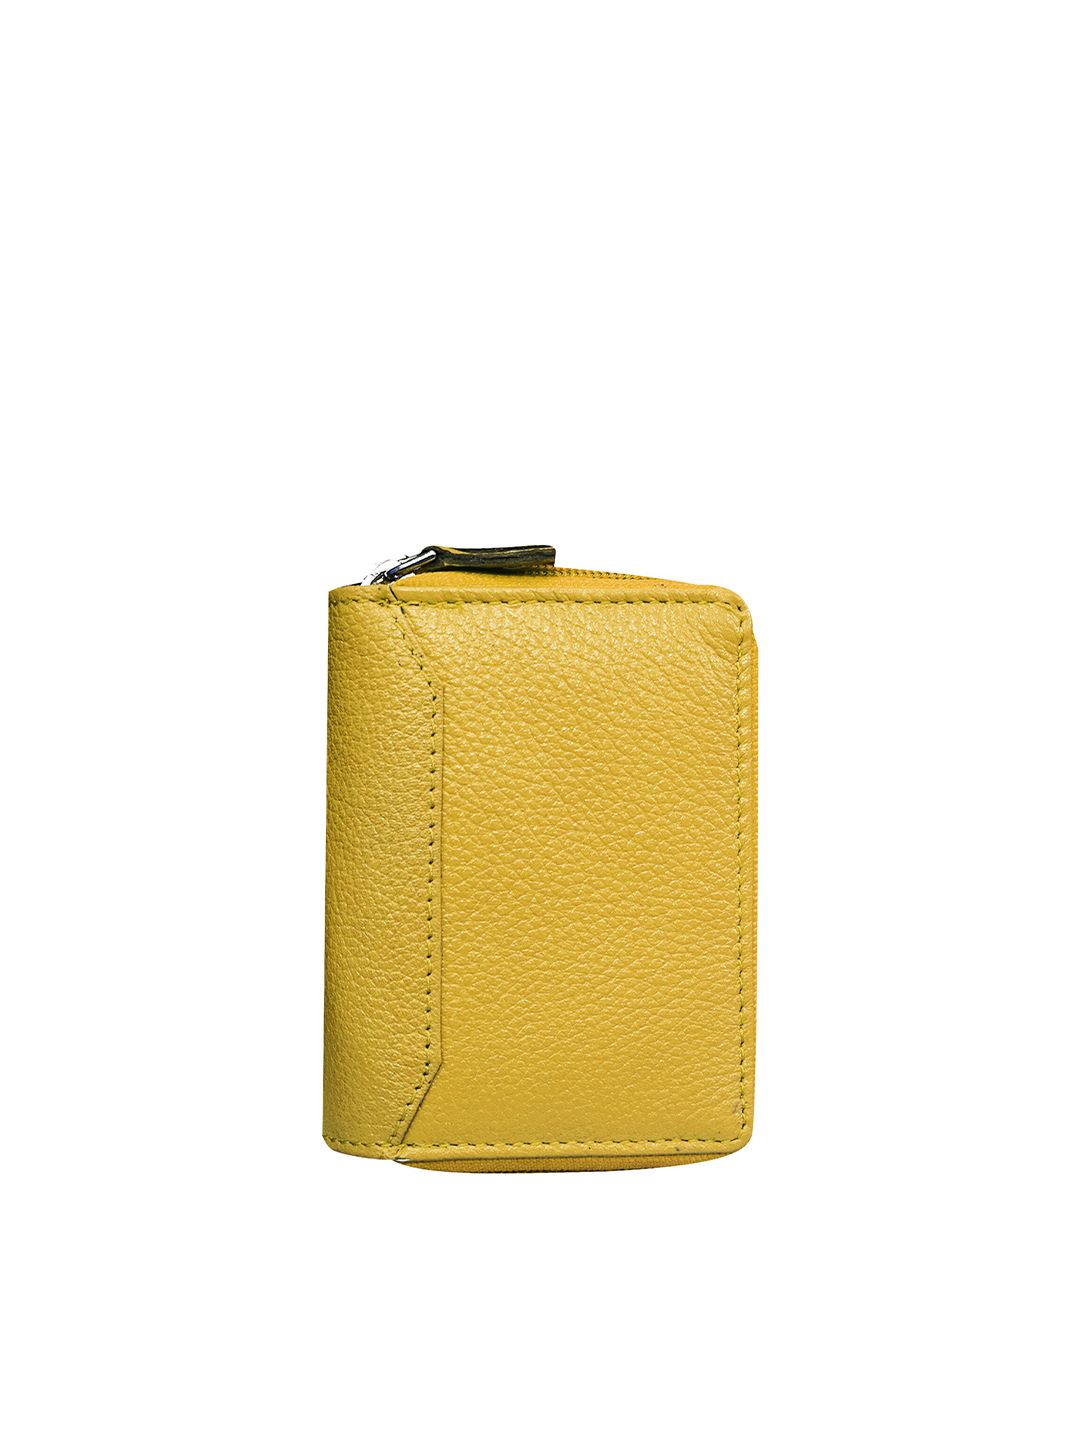 ABYS Unisex Yellow Textured Leather Zip Around Wallet Price in India